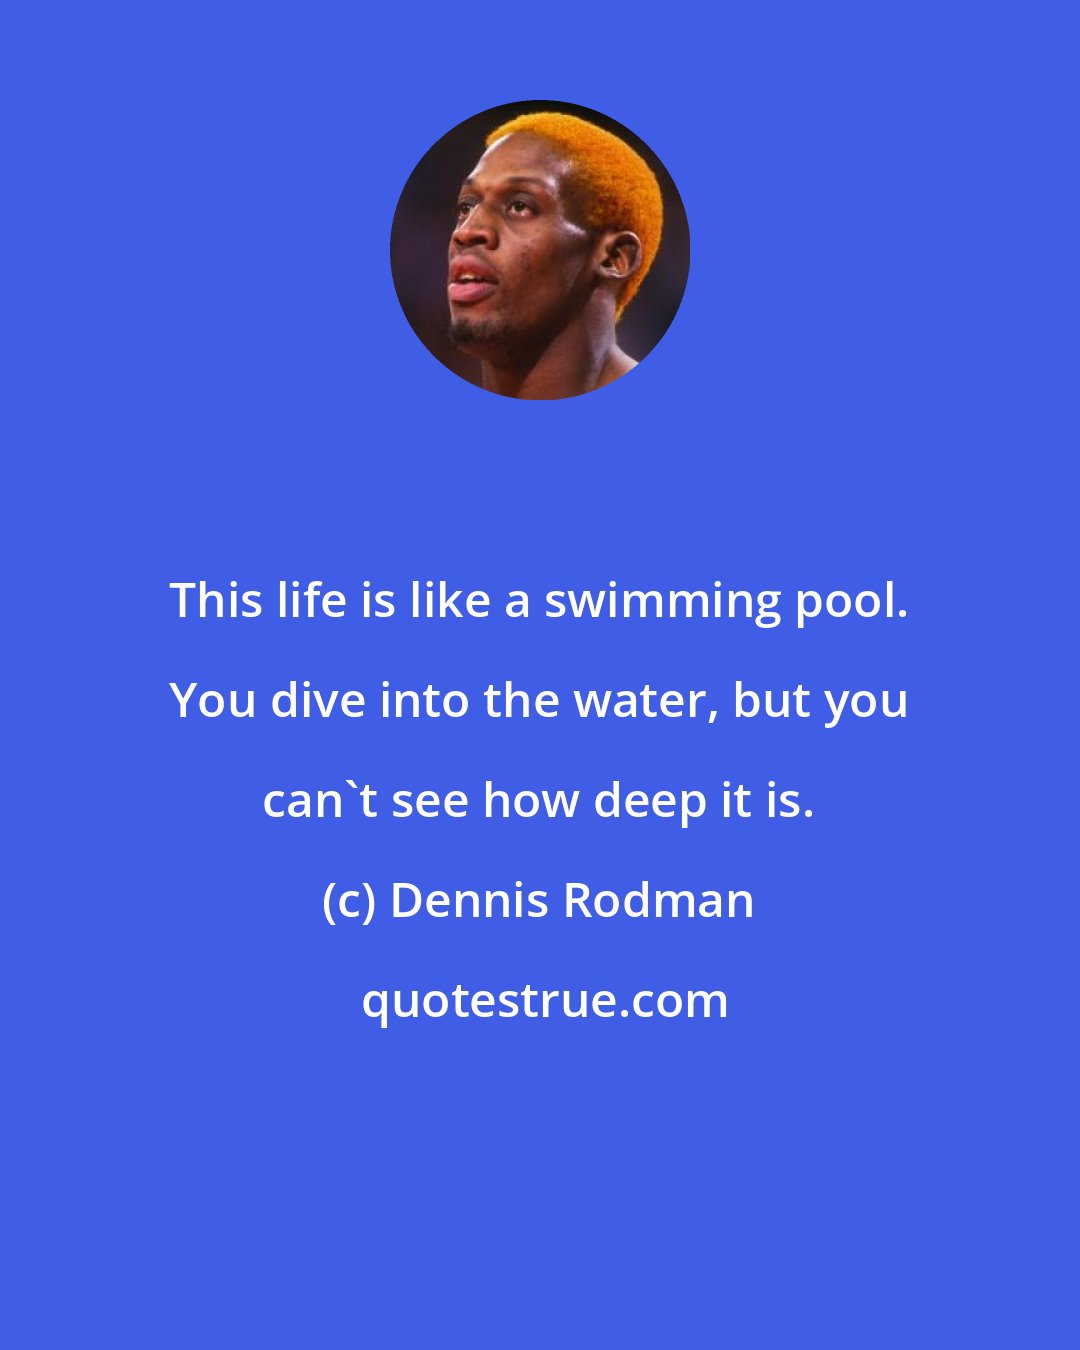 Dennis Rodman: This life is like a swimming pool. You dive into the water, but you can't see how deep it is.